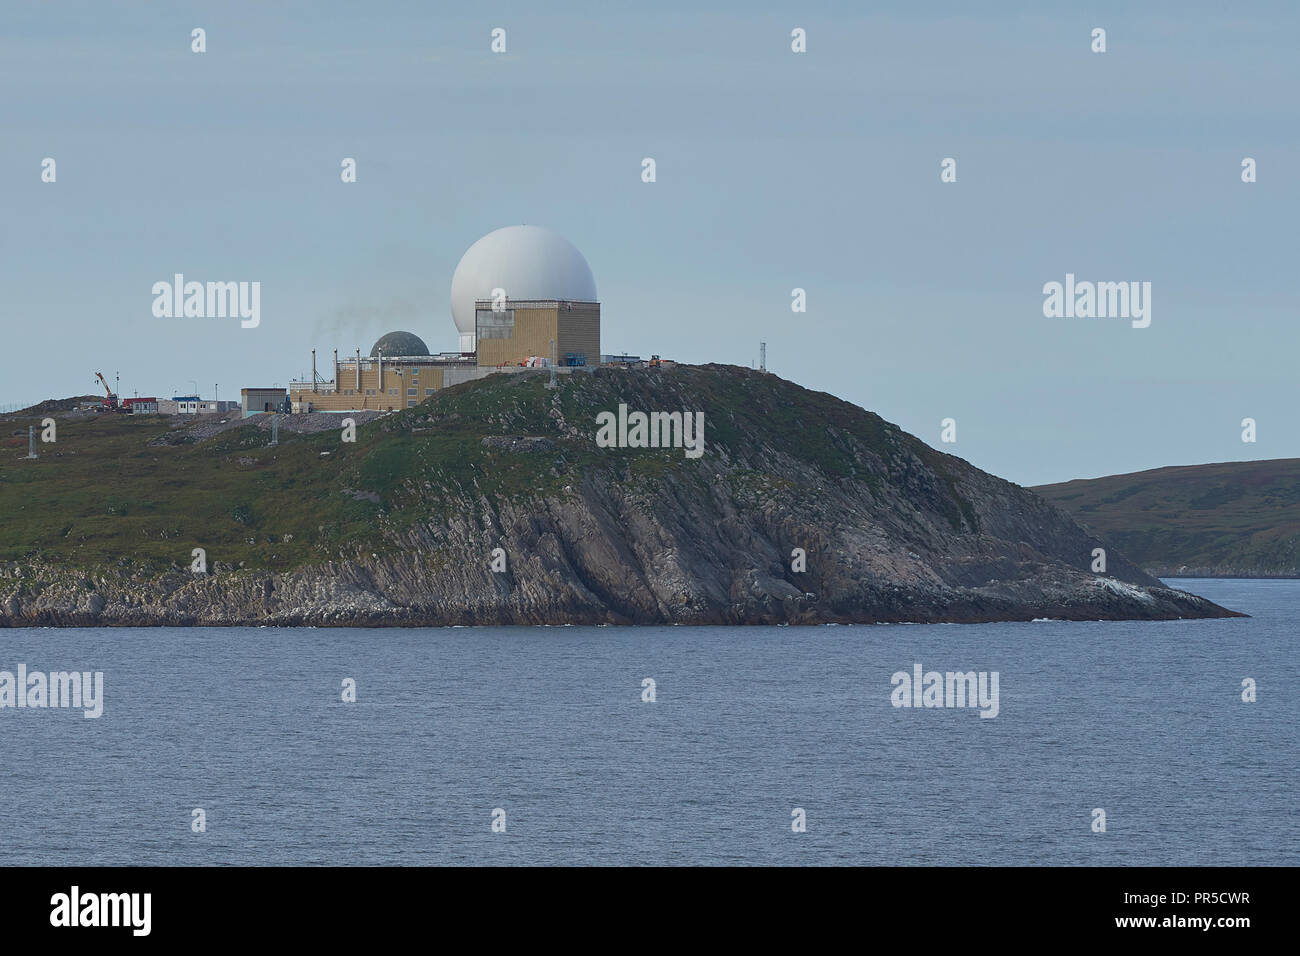 The Globus 2 Early Warning Radar Site At Vardø On The Island Of Vardøya,  North Of The Arctic Circle, Finnmark County, Norway Stock Photo - Alamy